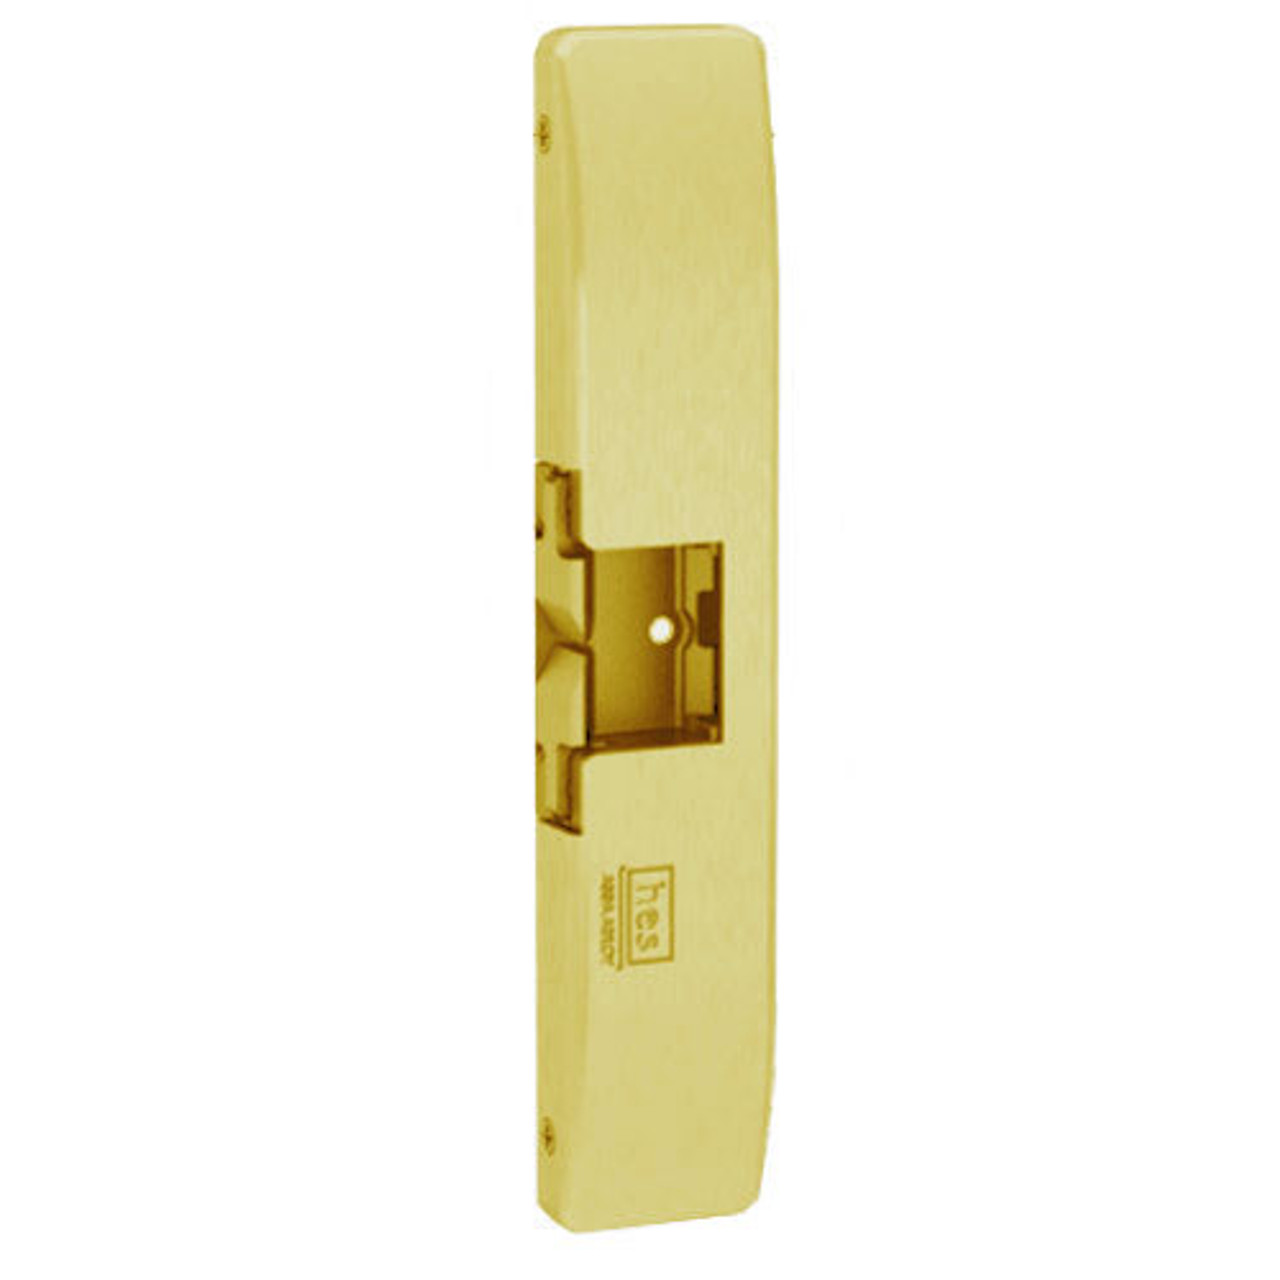 9500-605-LBSM Hes Electric Strike Fire Rated with LatchBolt Strike Monitor in Bright Brass finish